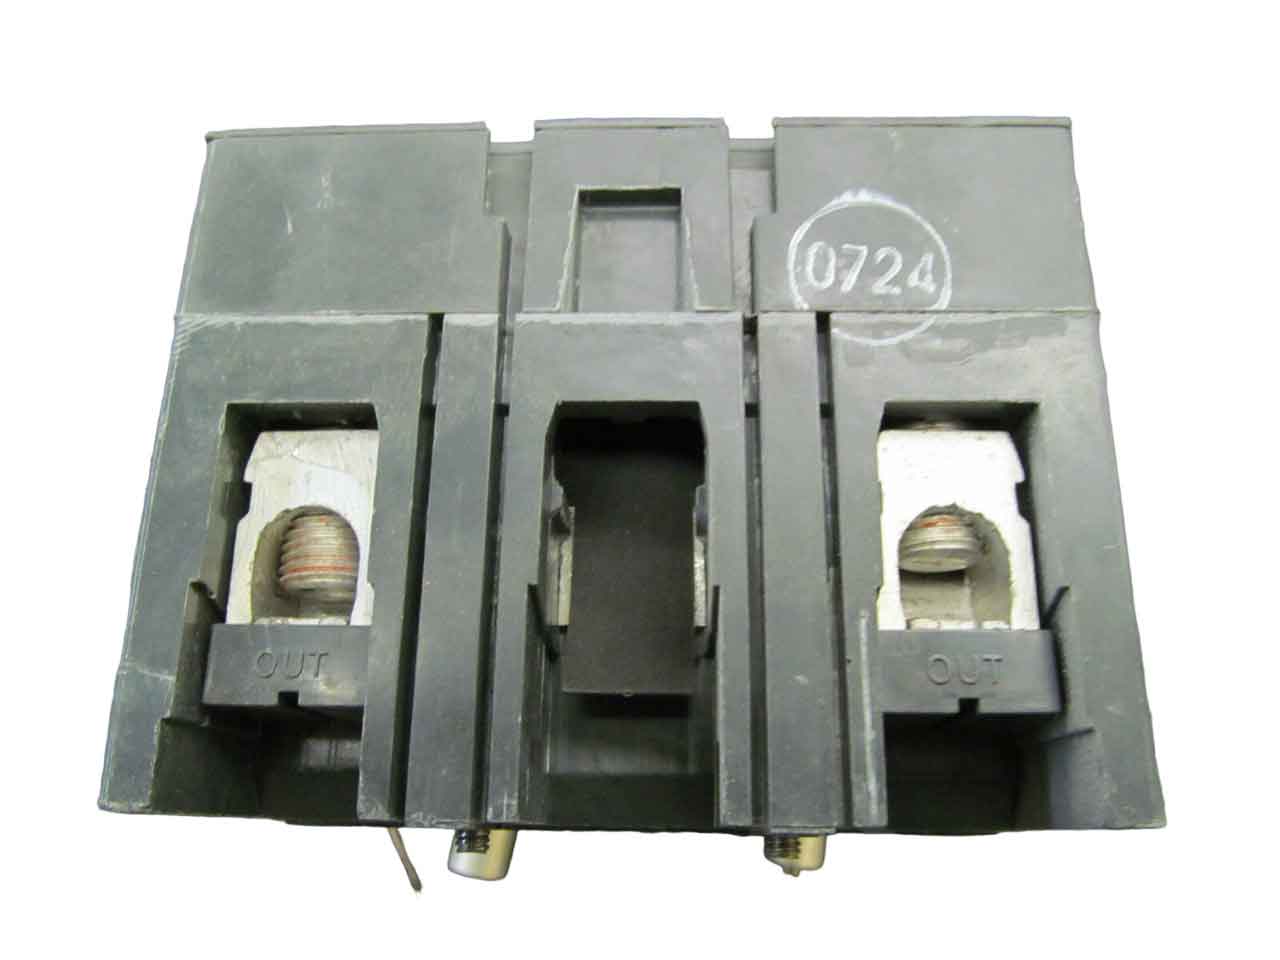 SEHA24AT0150 - General Electrics - Molded Case Circuit Breakers